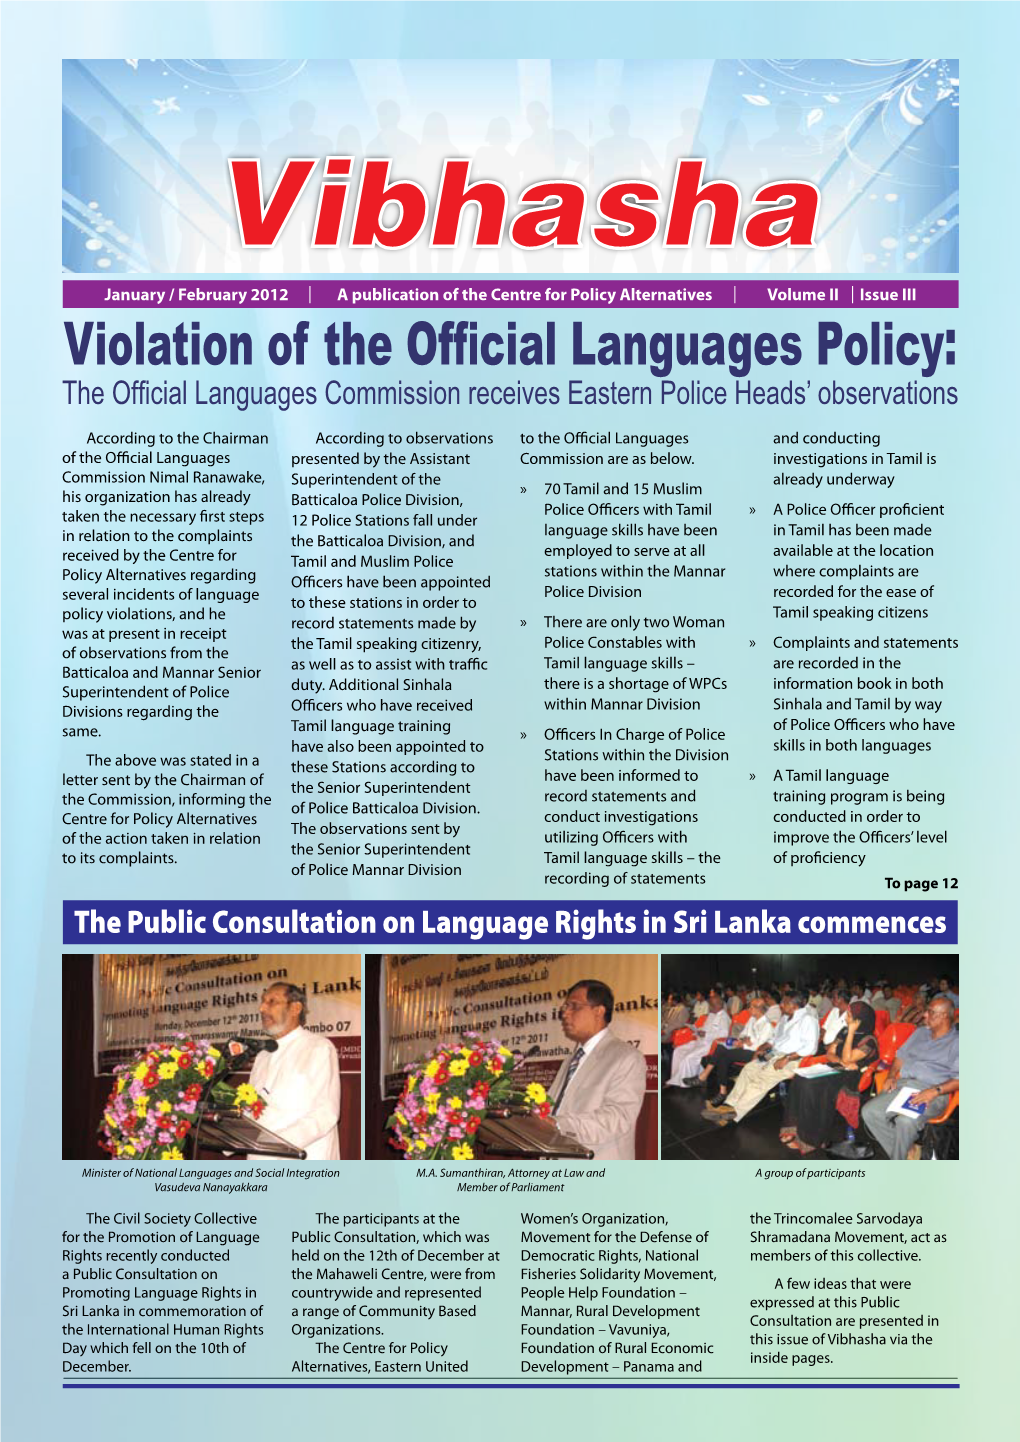 Violation of the Official Languages Policy: the Official Languages Commission Receives Eastern Police Heads’ Observations